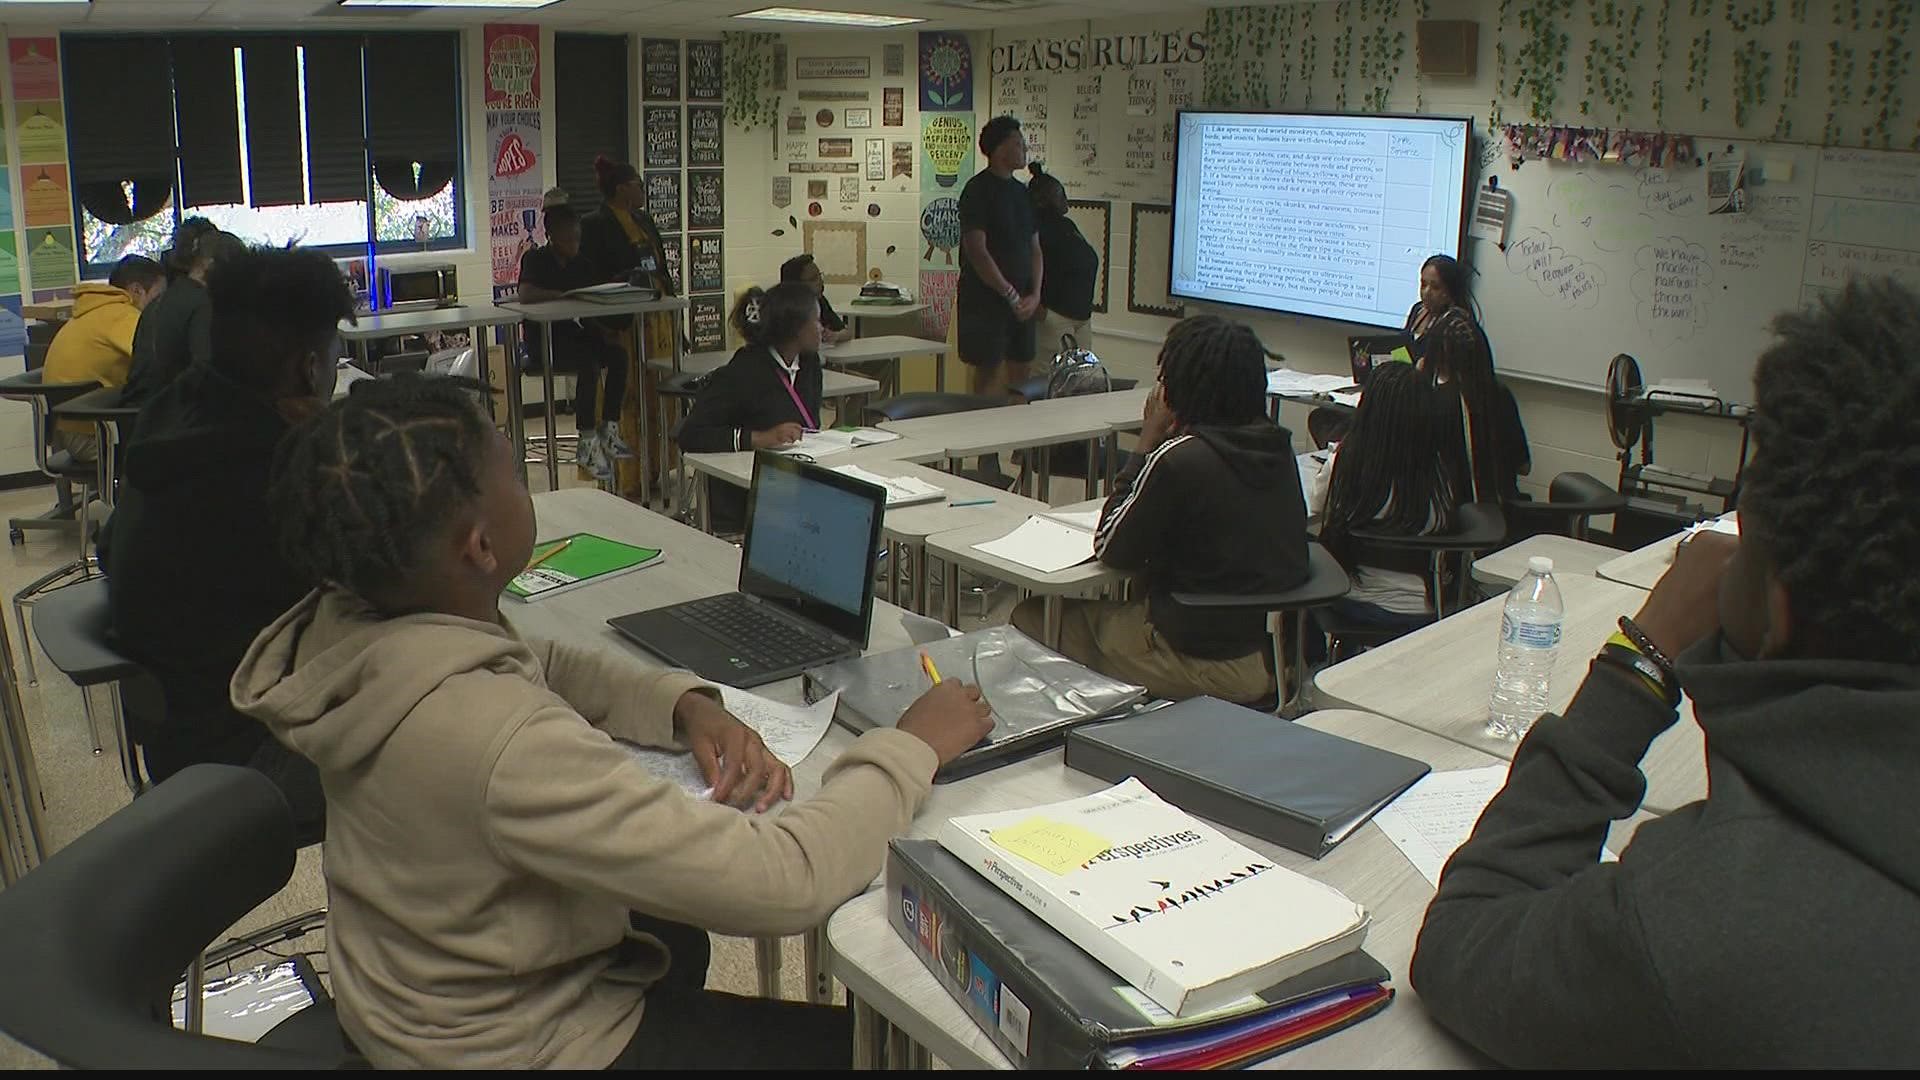 11Alive's Joe Ripley takes us to the Frederick Douglas 9th Grade STEAM Academy, where the hope is to break barriers and spark change.